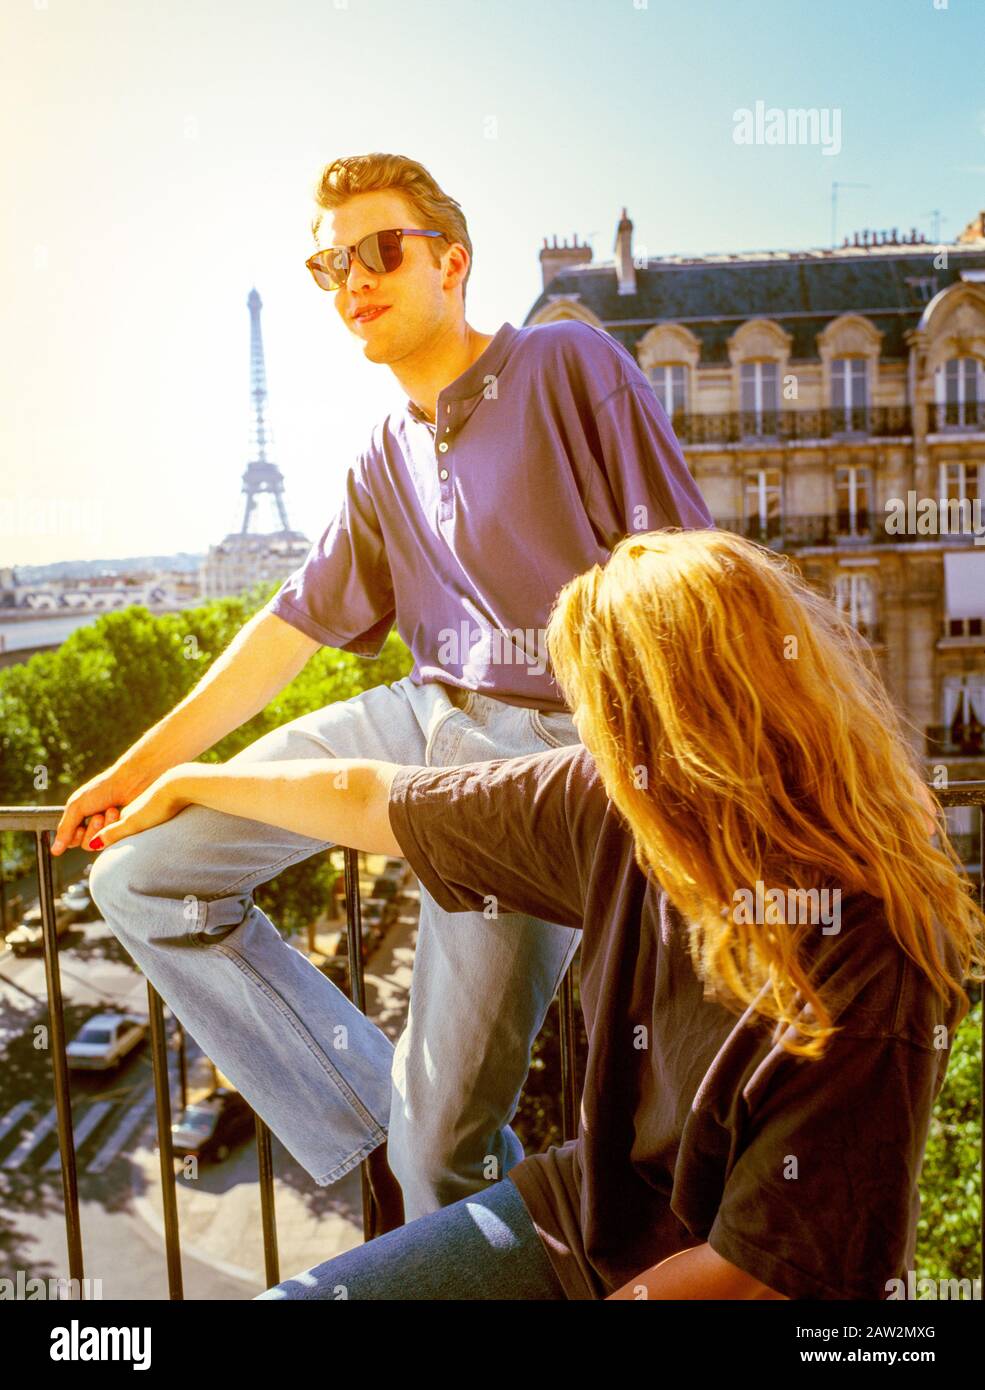 Paris Hotel Balcony with Young Couple and Eiffel Tower Stock Photo